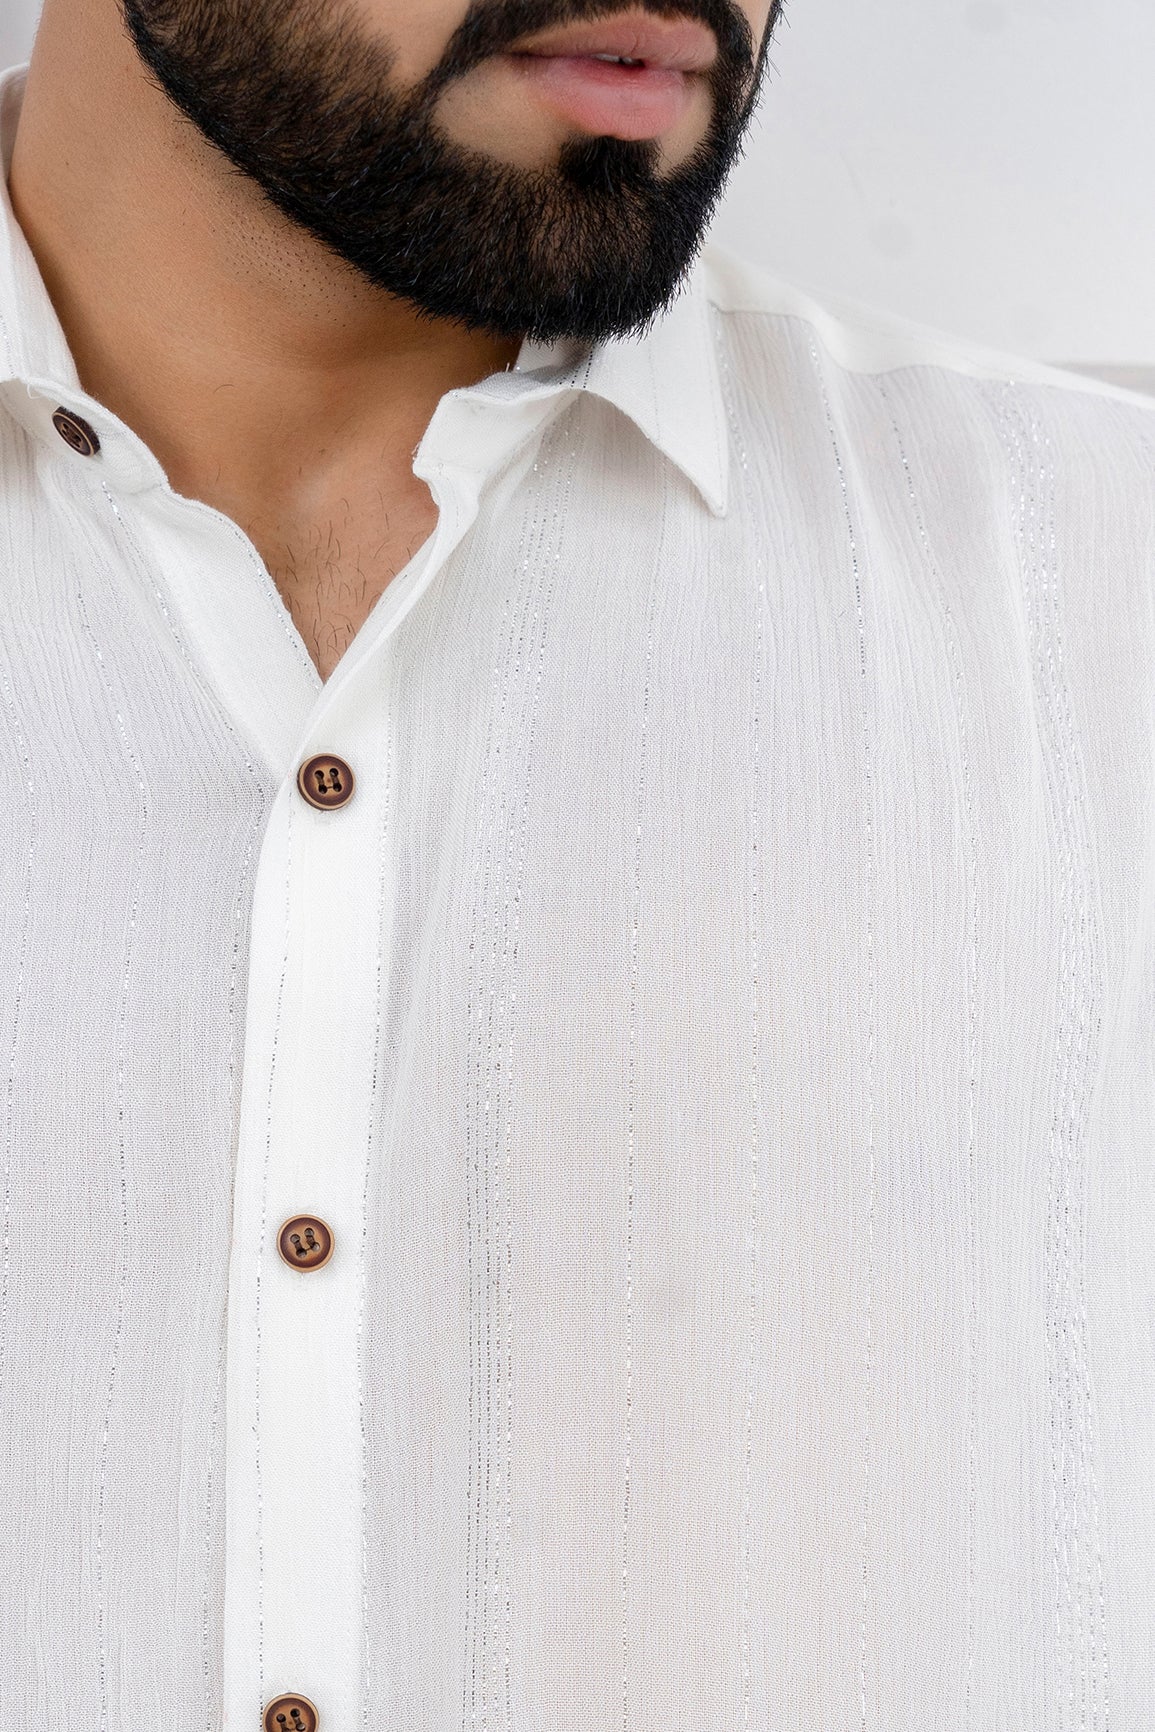 Firangi Yarn Relaxed Fit Super Flowy Re-engineered Cotton Lurex- Half Sleeves Party Shirt White and Silver